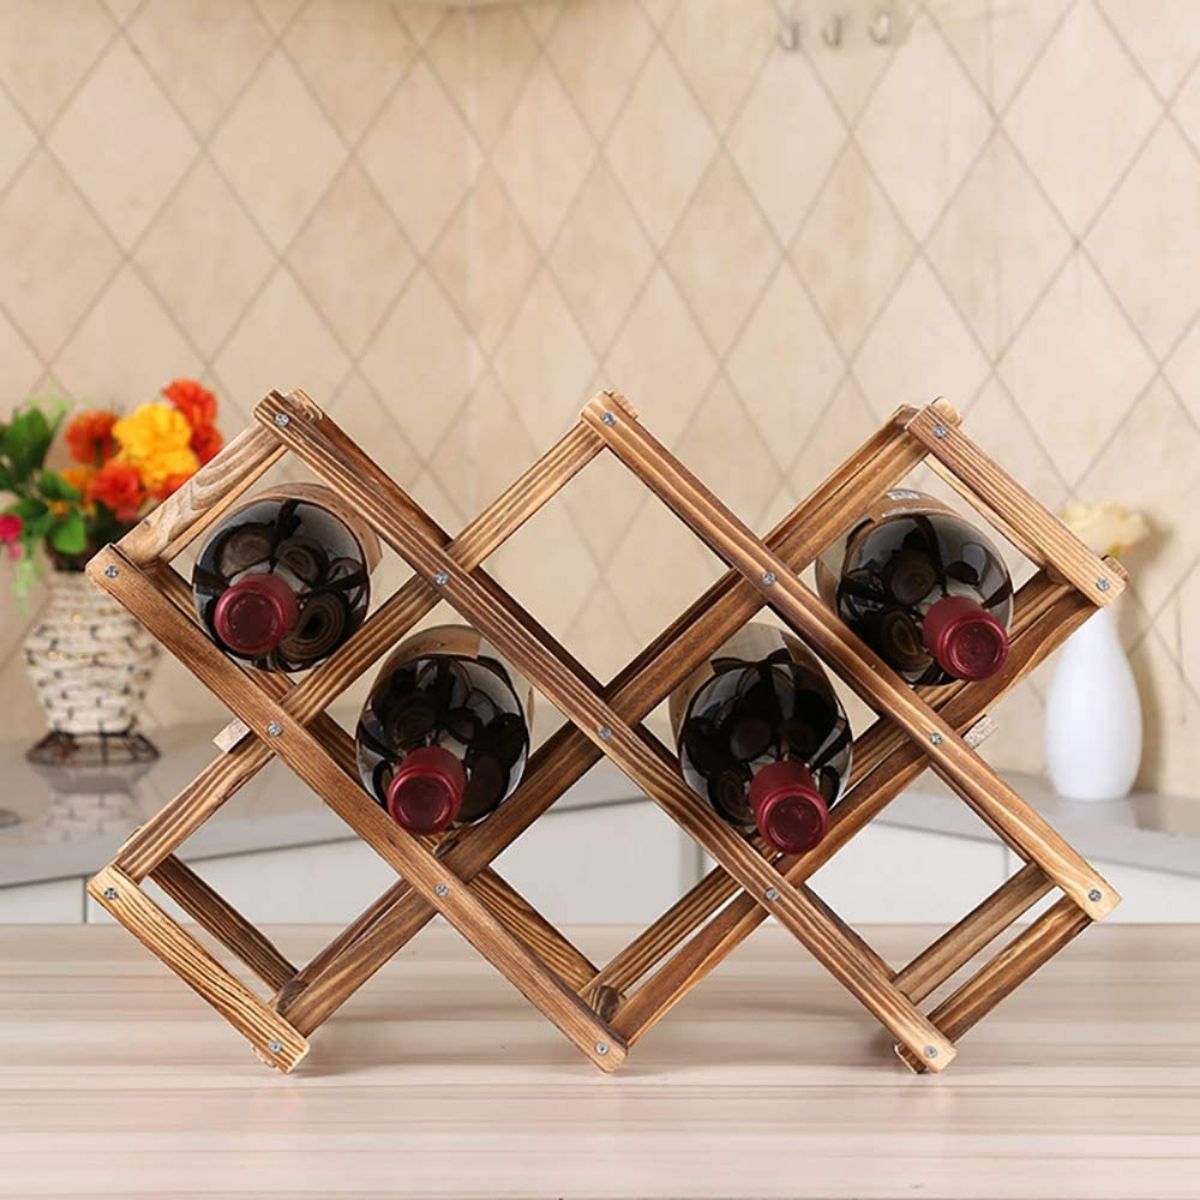 The Best Gifts for Wine Lovers Option: Ferfil Wine Rack